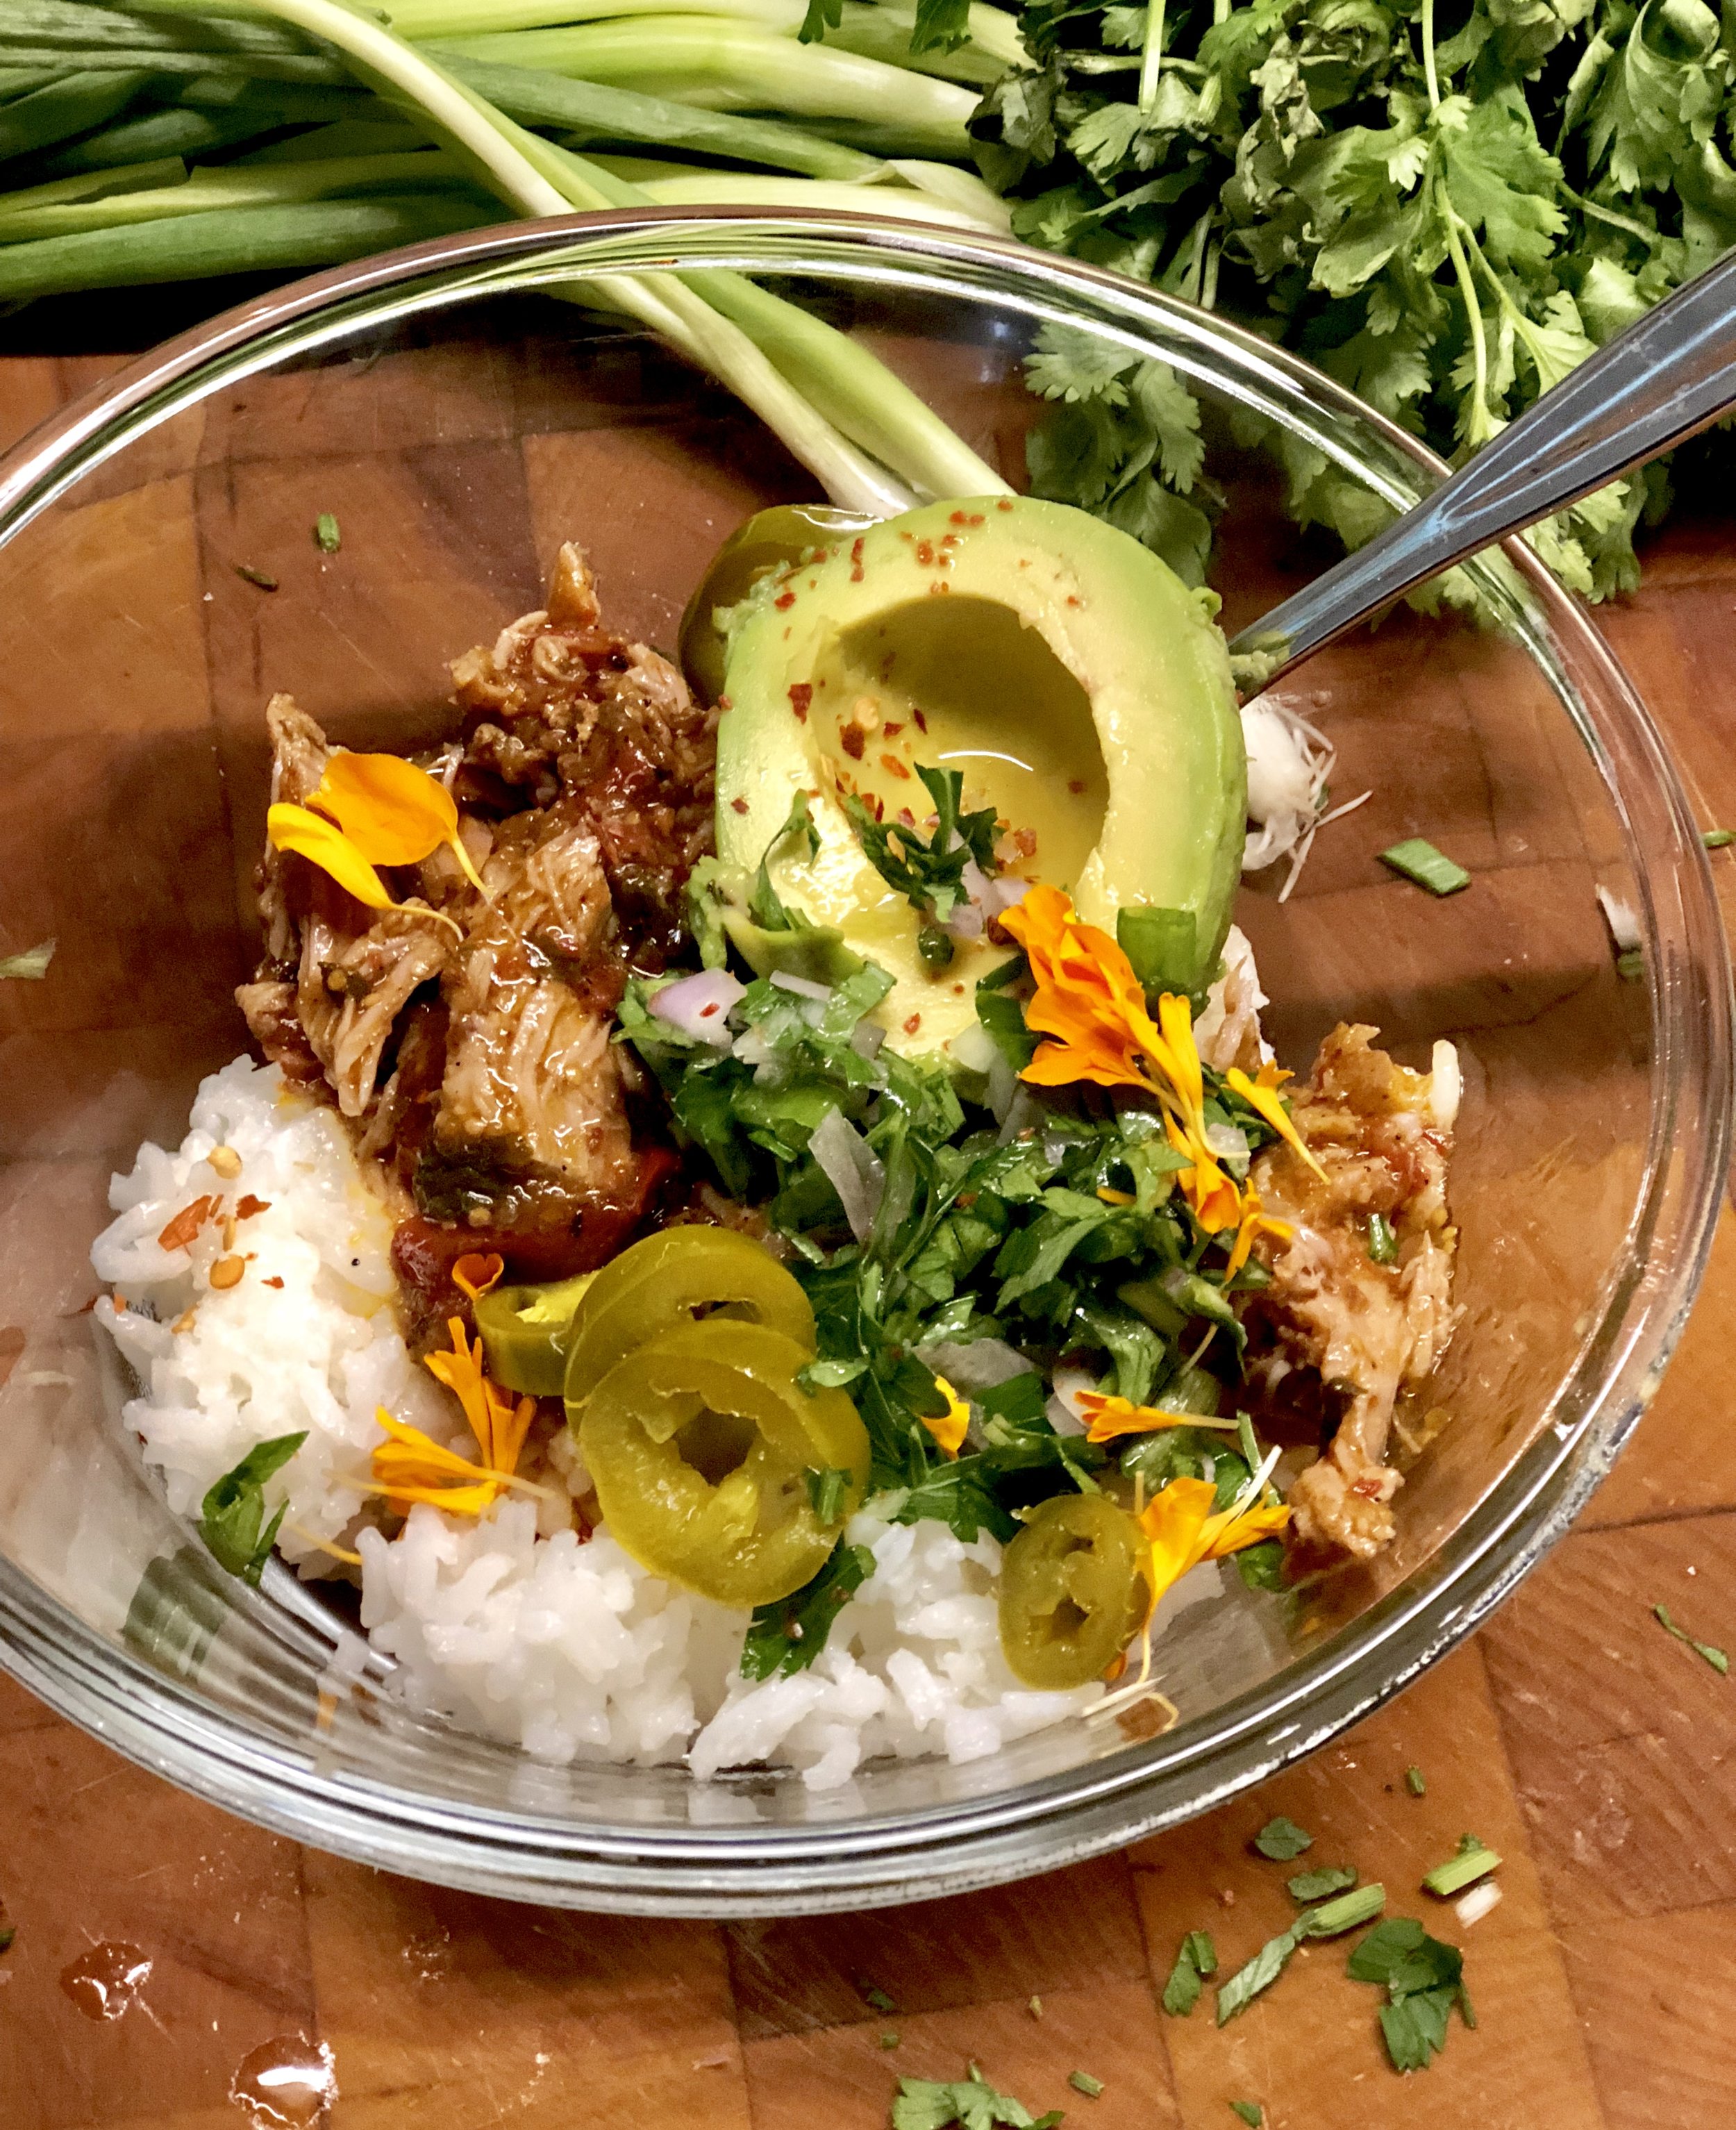 Serve it like this. People can choose the bite they're in the mood for. A bit of rice, a bit of pork. A spoonful of avocado with a bit of jalapeño. Every bite interesting.